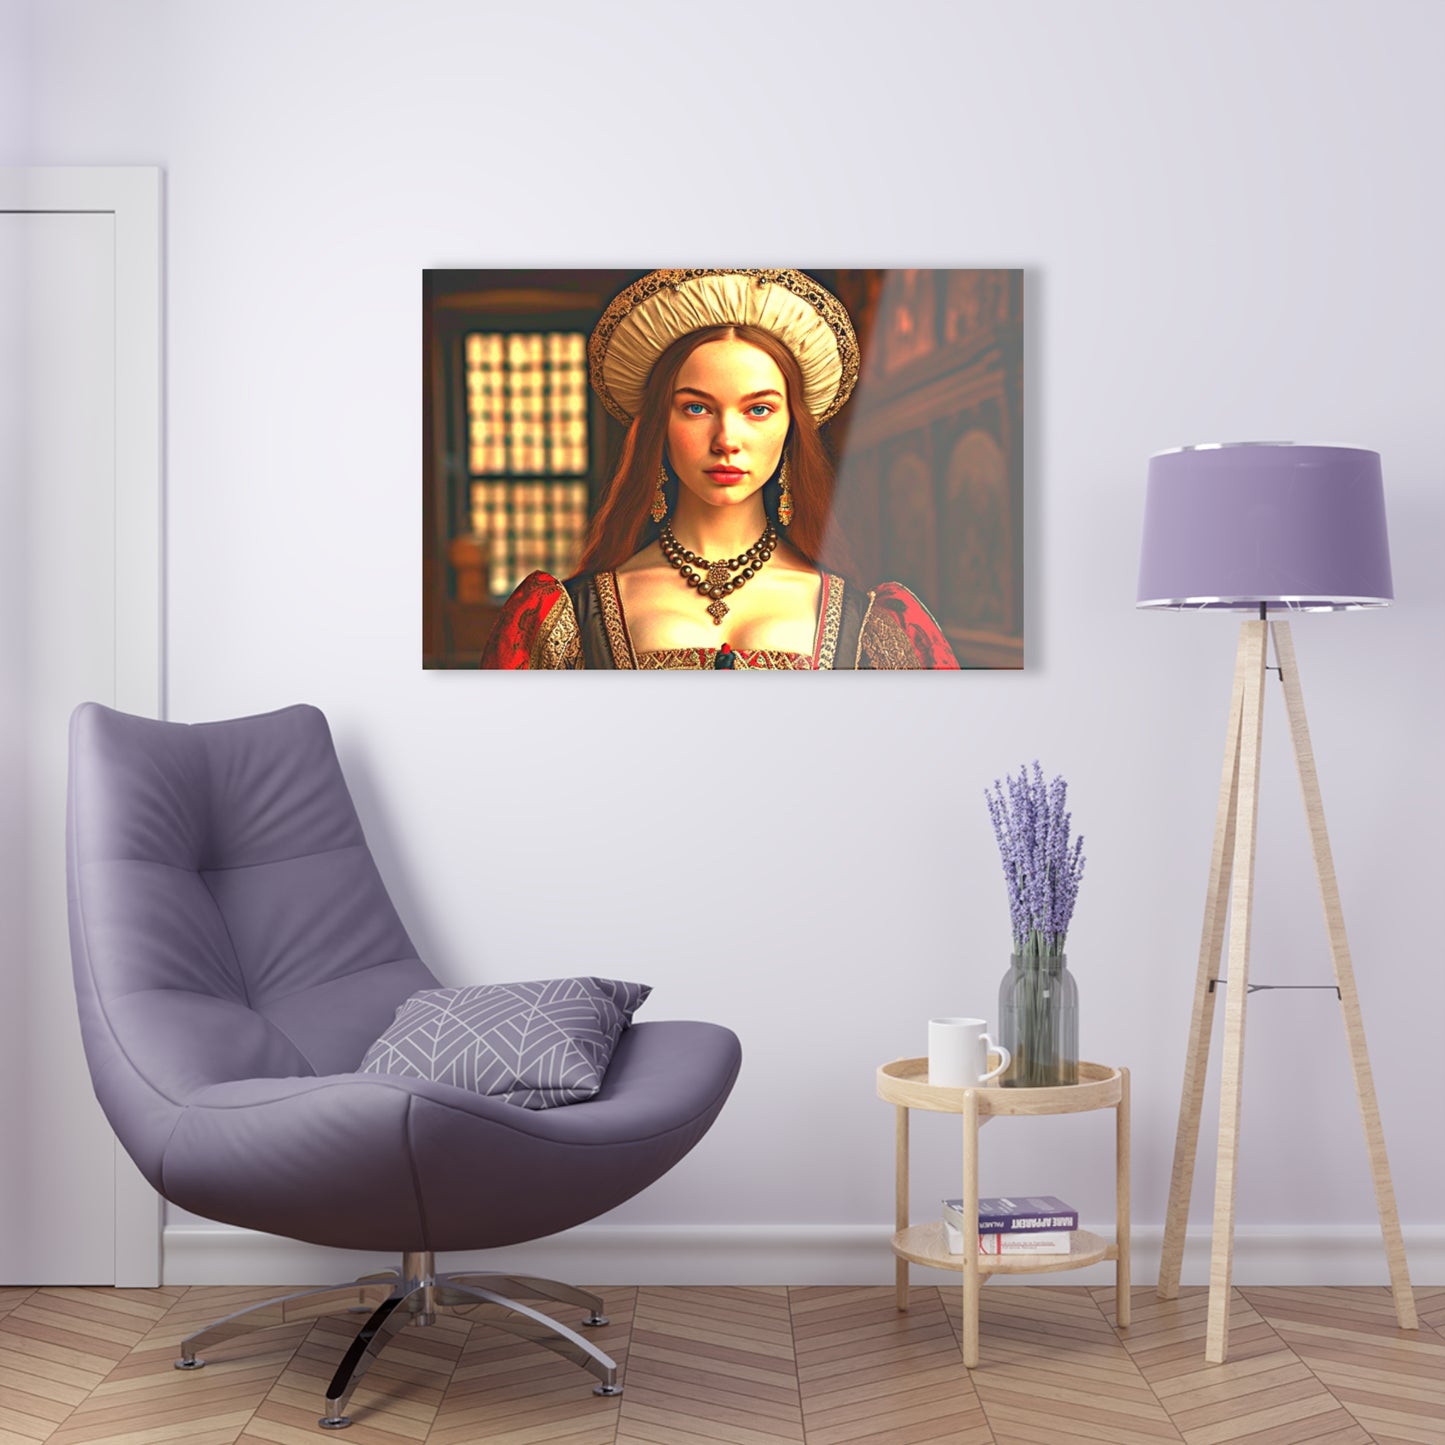 Lady in Red - Acrylic Prints